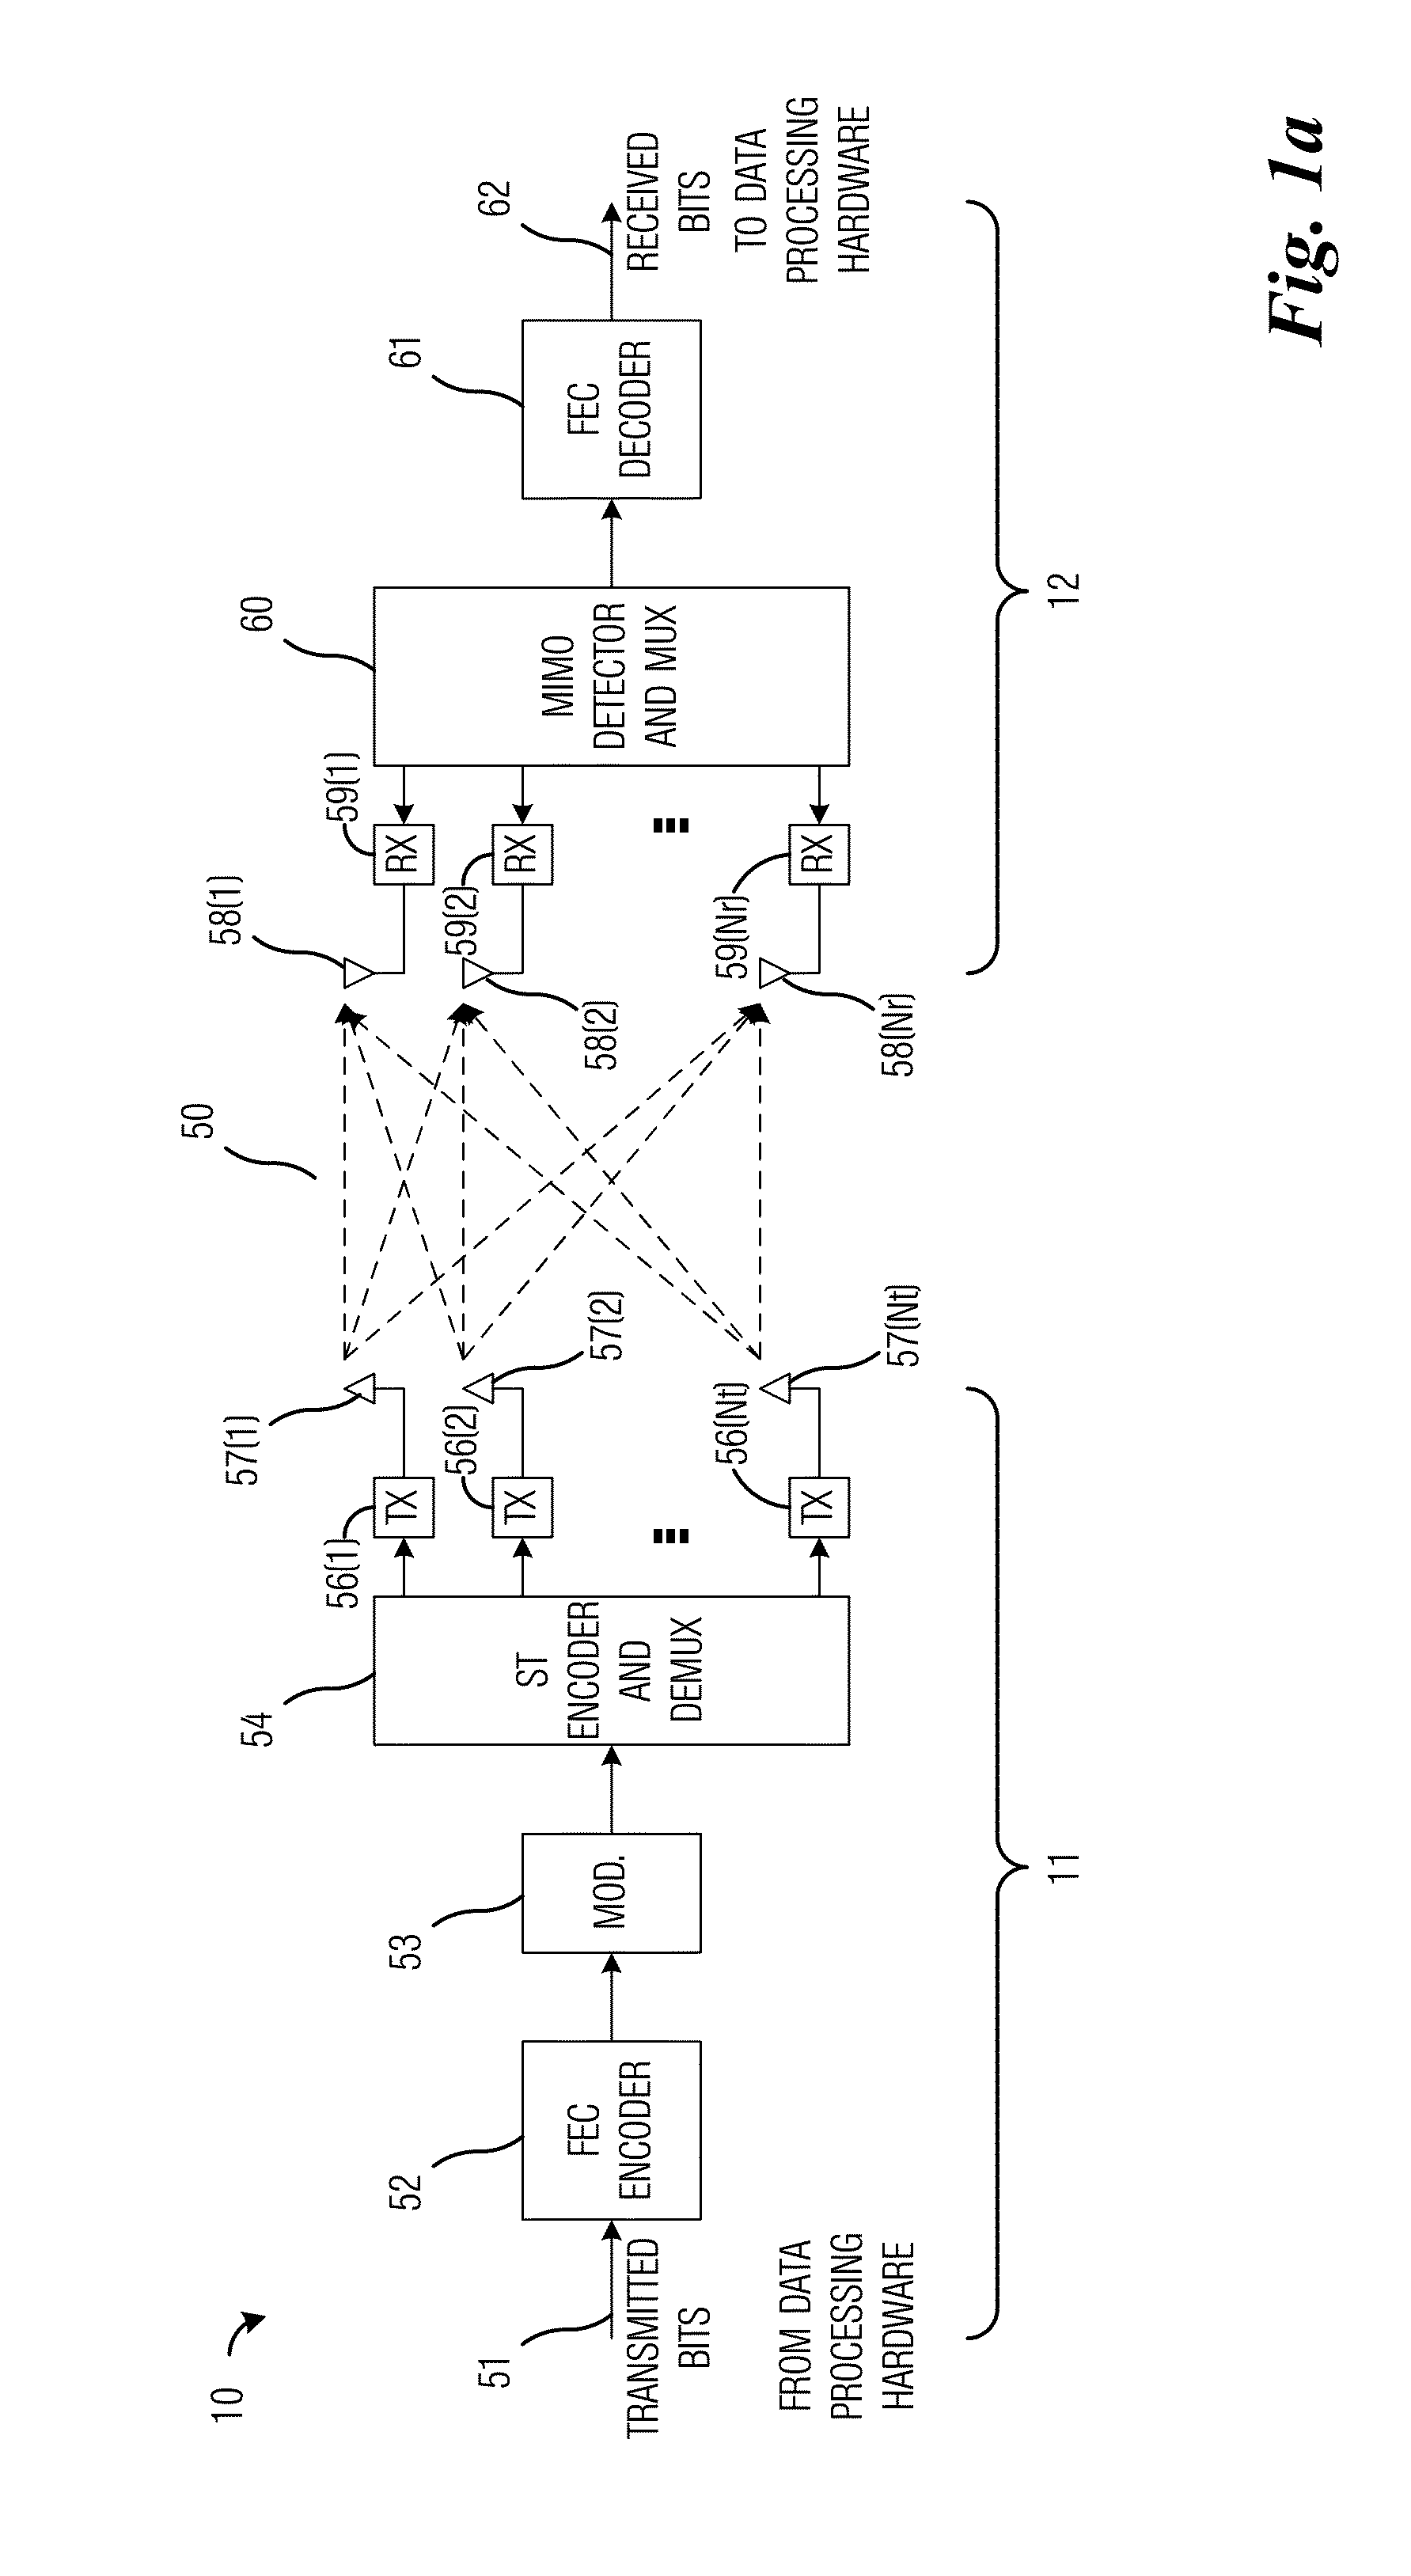 System and method for transmitter and receiver operation for multiple-input, multiple-output communications based on prior channel knowledge